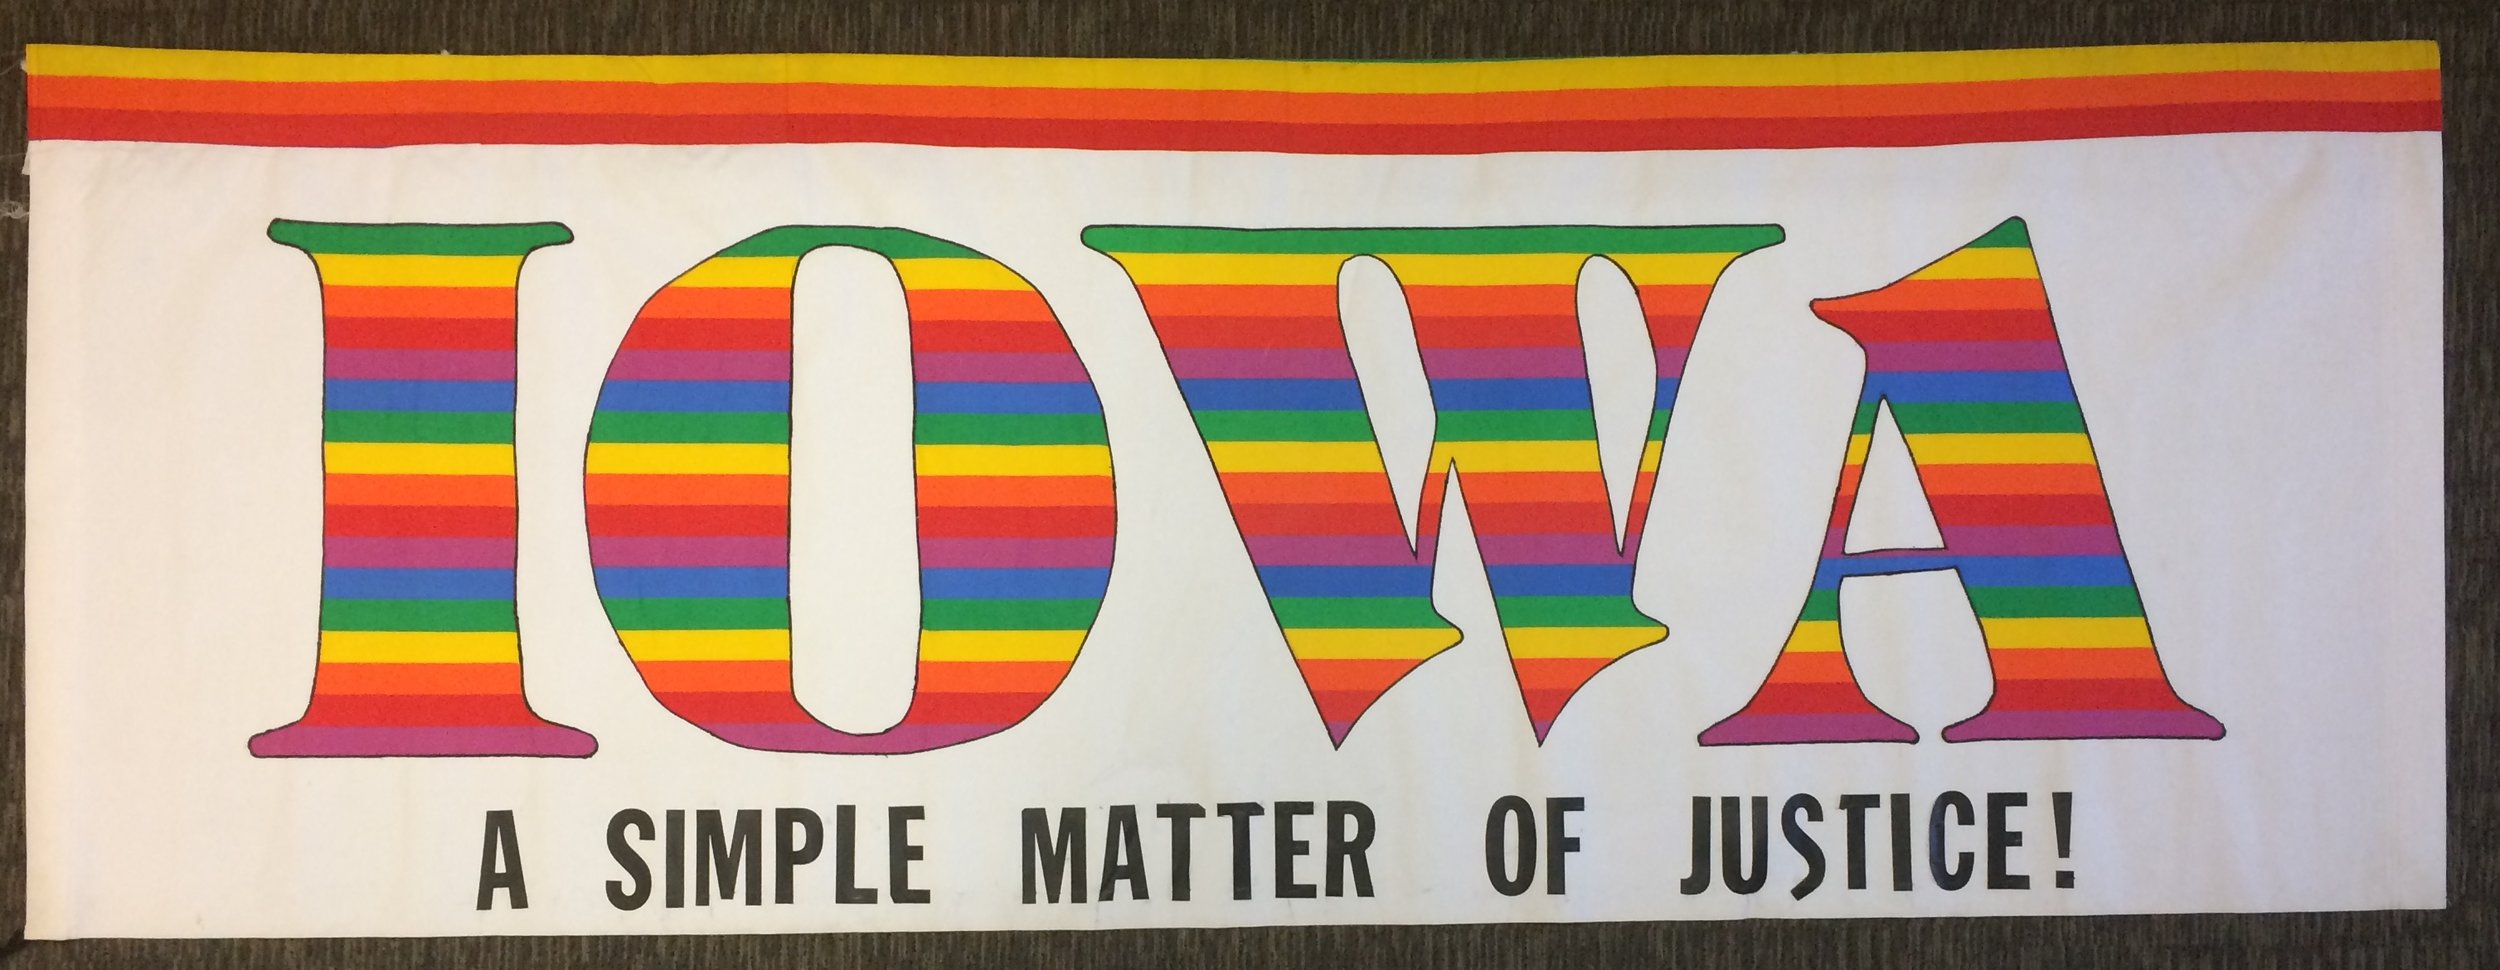 Banner inside of purple bag. Reads: "Iowa: A Simple Matter of Justice!". "Iowa" is in rainbow block lettering and "A Simple Matter of Justice!" in printed with black lettering.